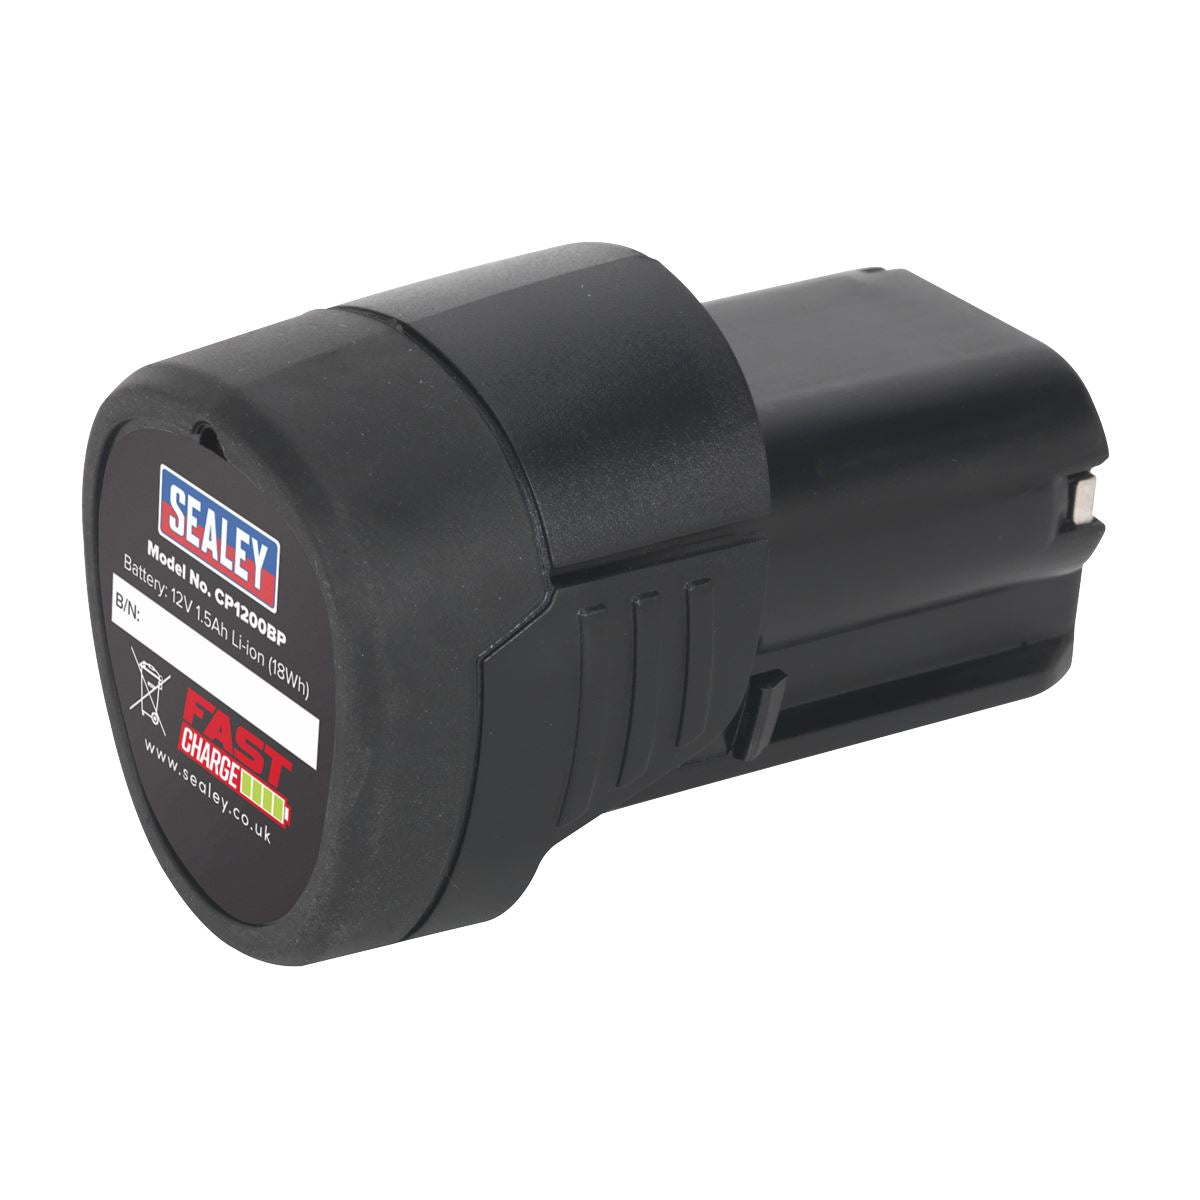 Sealey Power Tool Battery 12V 1.5Ah Lithium-ion for SV12 Series